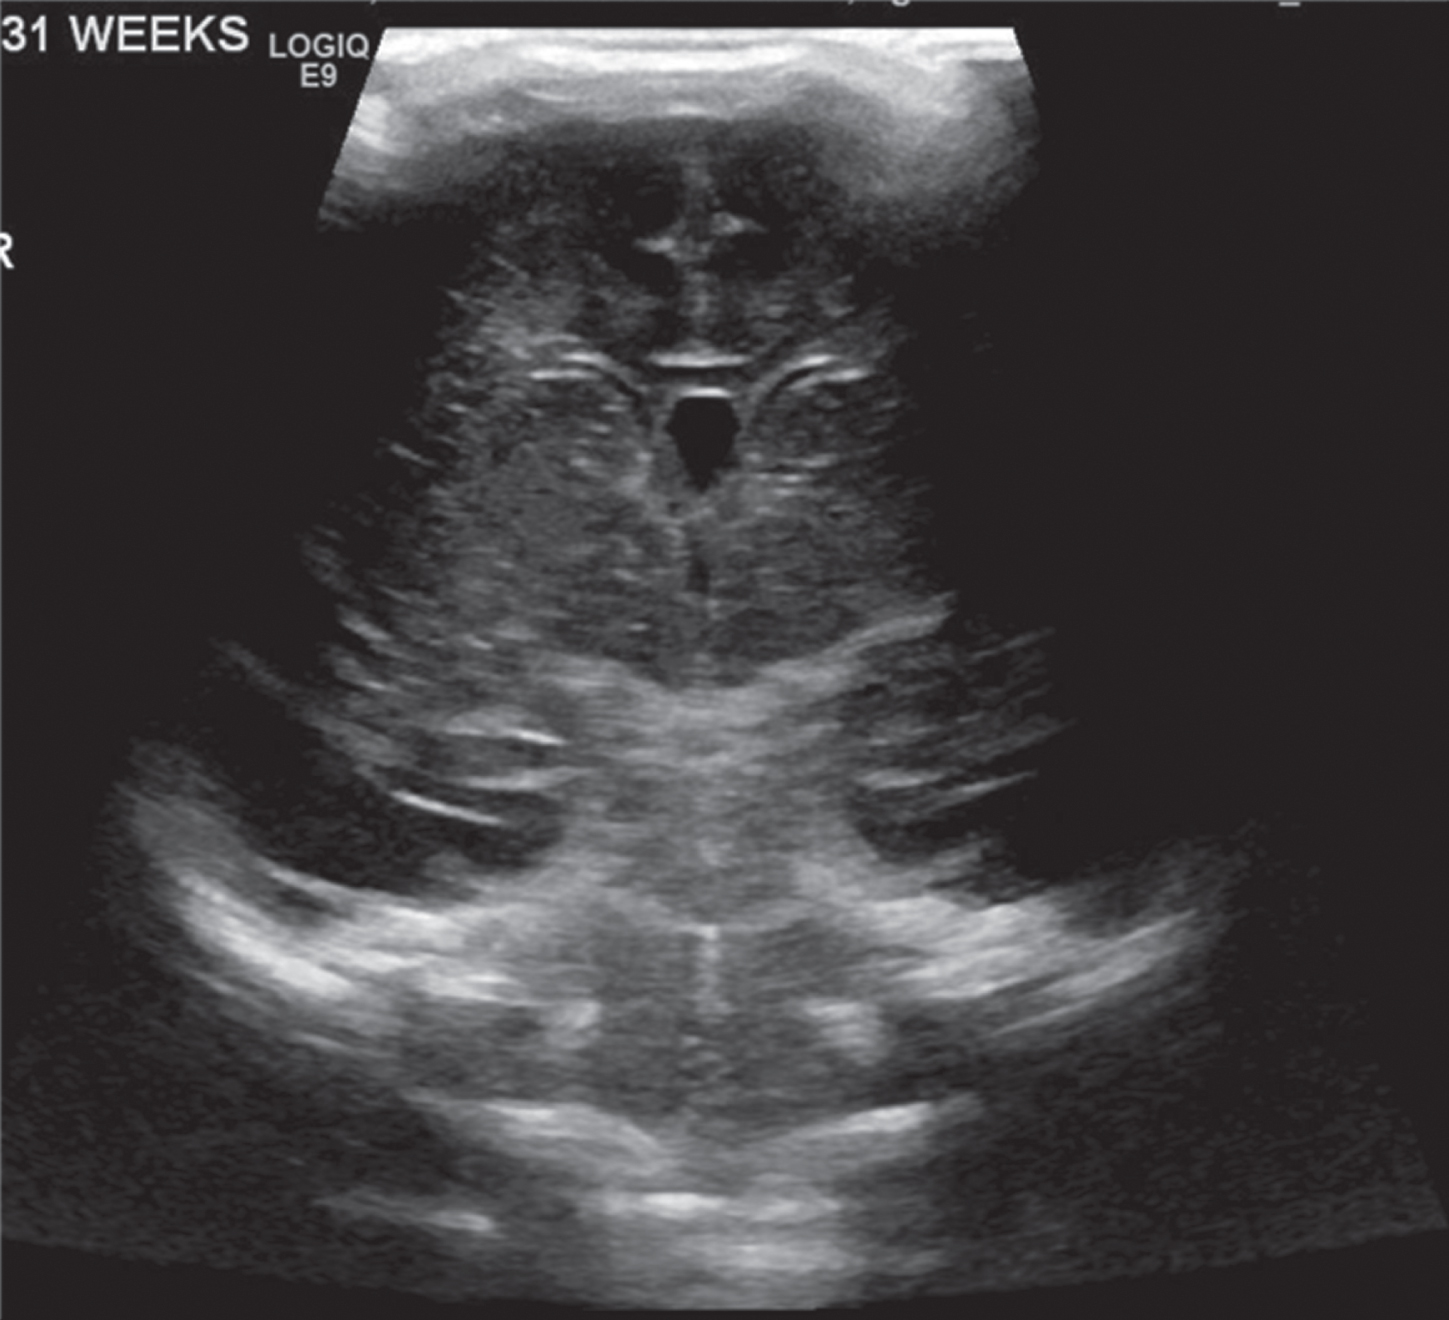 Normal appearing head ultrasound of a 31 week GA newborn at 4 days of life